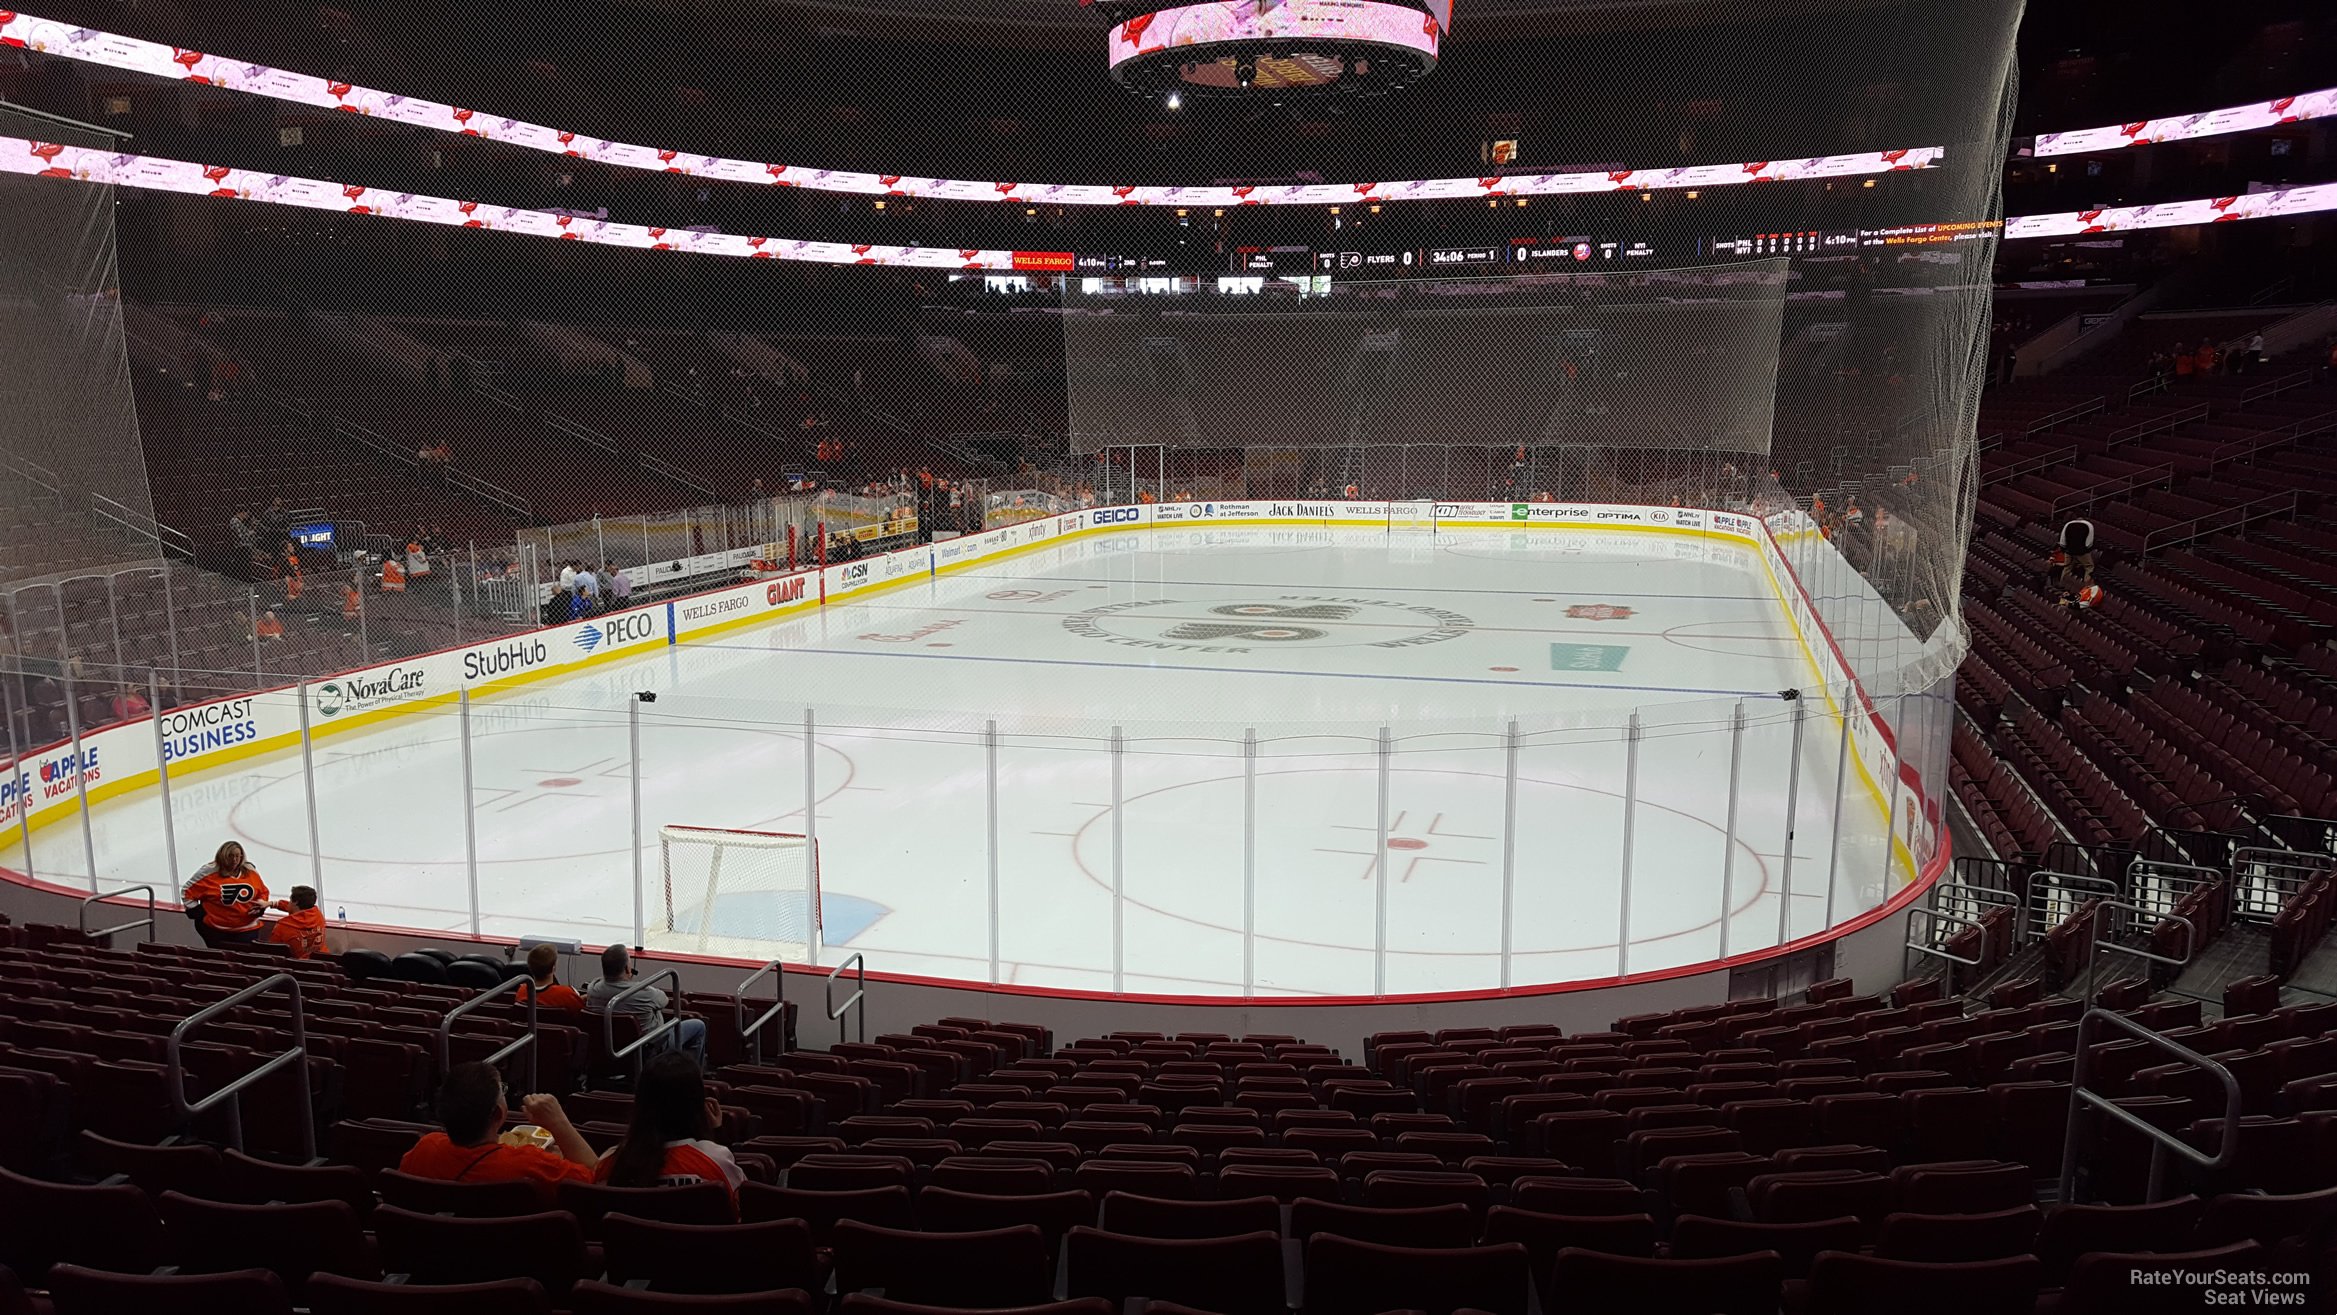 section 108, row 17 seat view  for hockey - wells fargo center